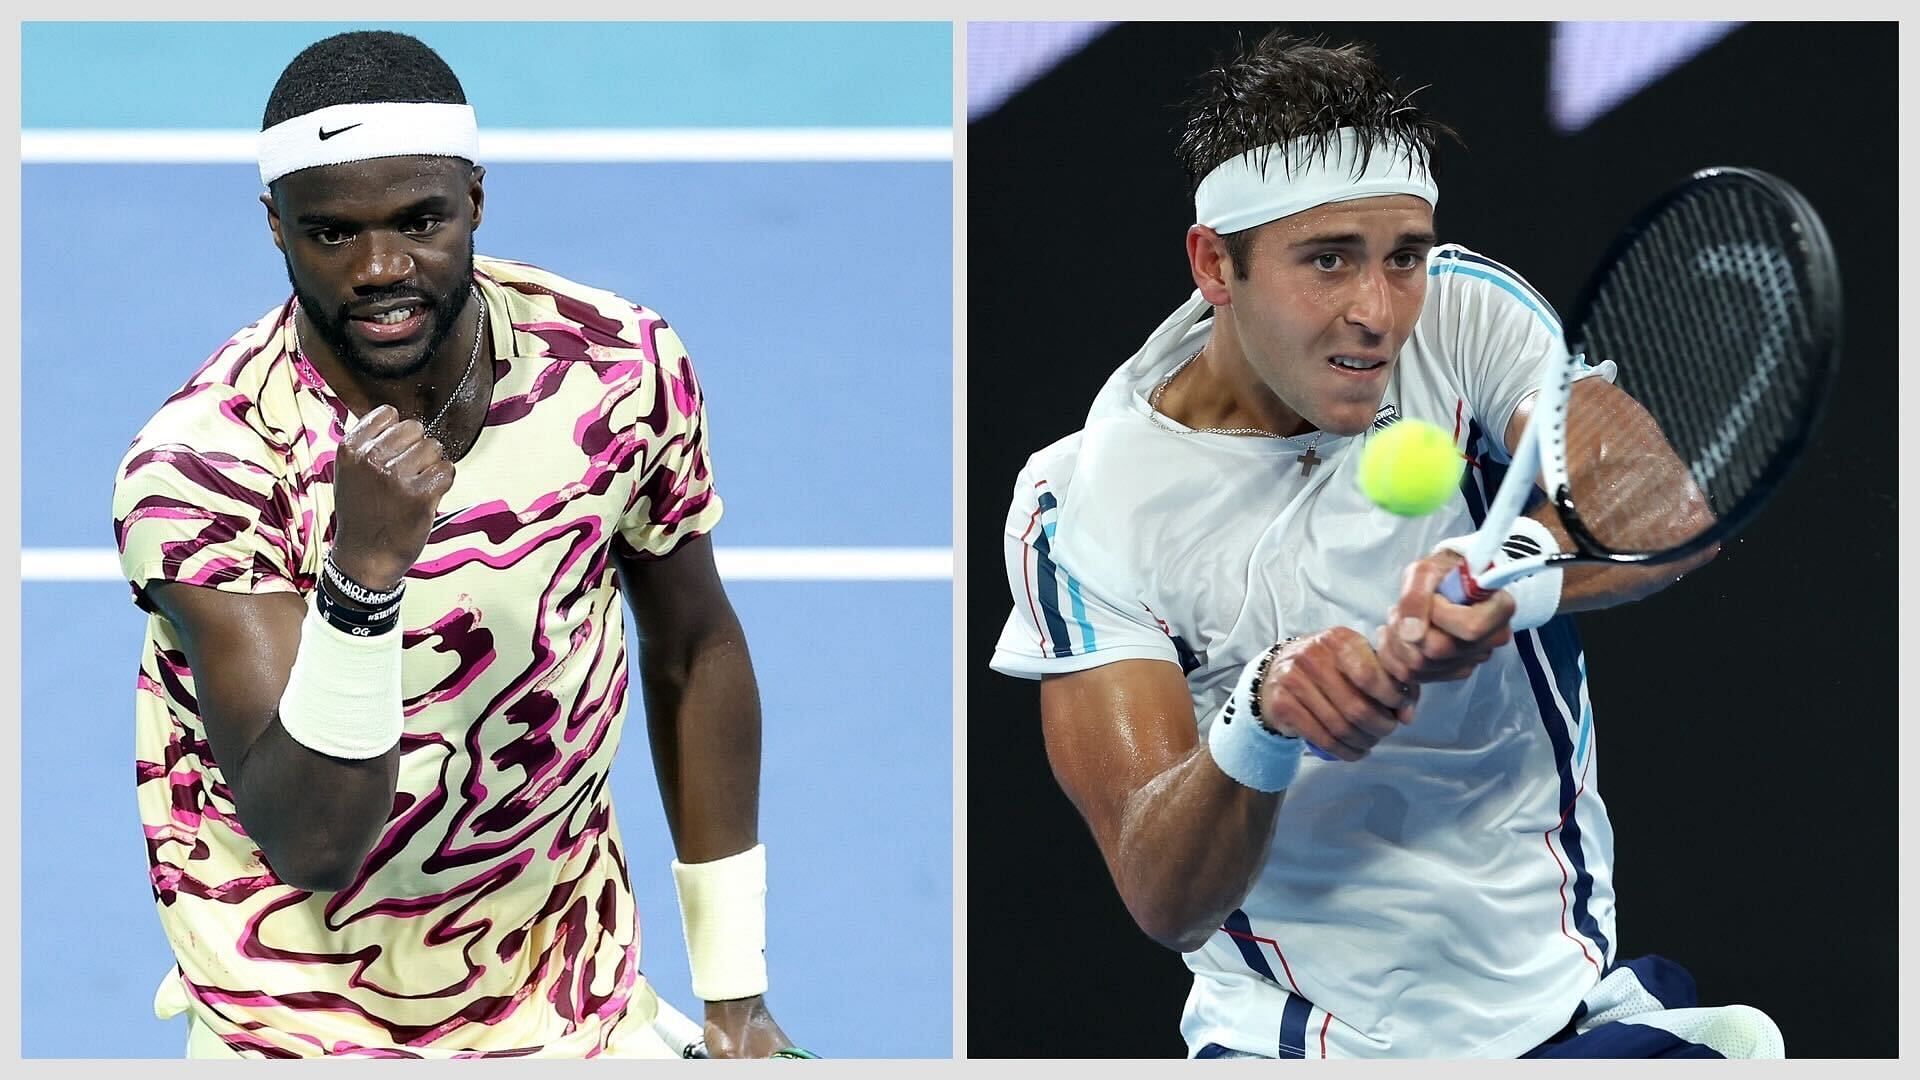 Frances Tiafoe vs Tomas Martin Etcheverry preview, head-to-head, prediction, odds, and pick